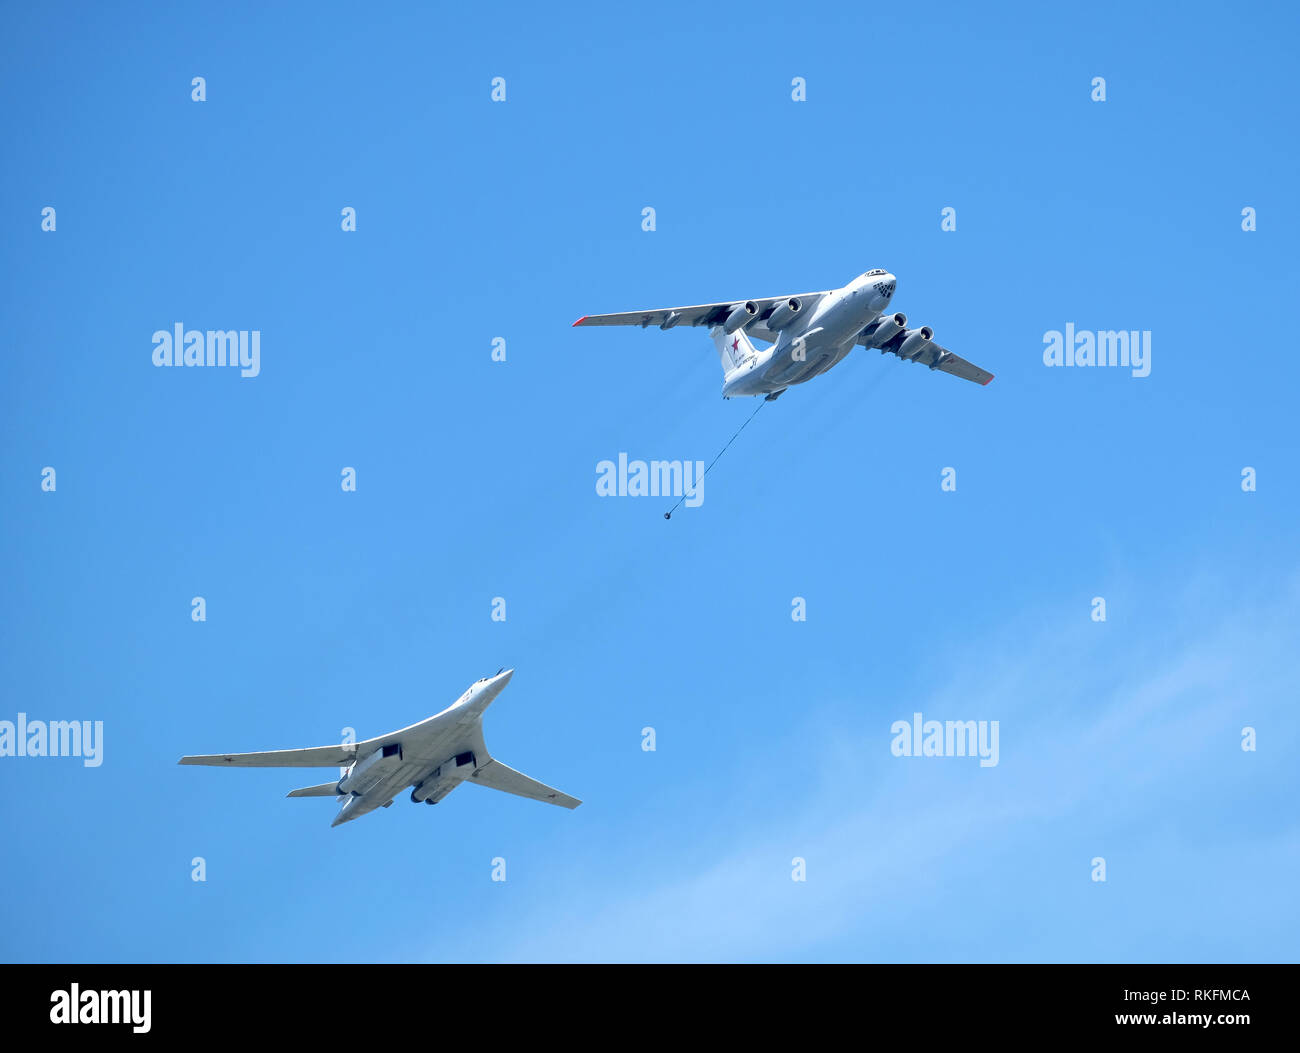 Russian military transport plane Il-78 refueling tankers imitates refueling the Supersonic bomber-missile carrier TU-160 Whire Swan in flight against Stock Photo